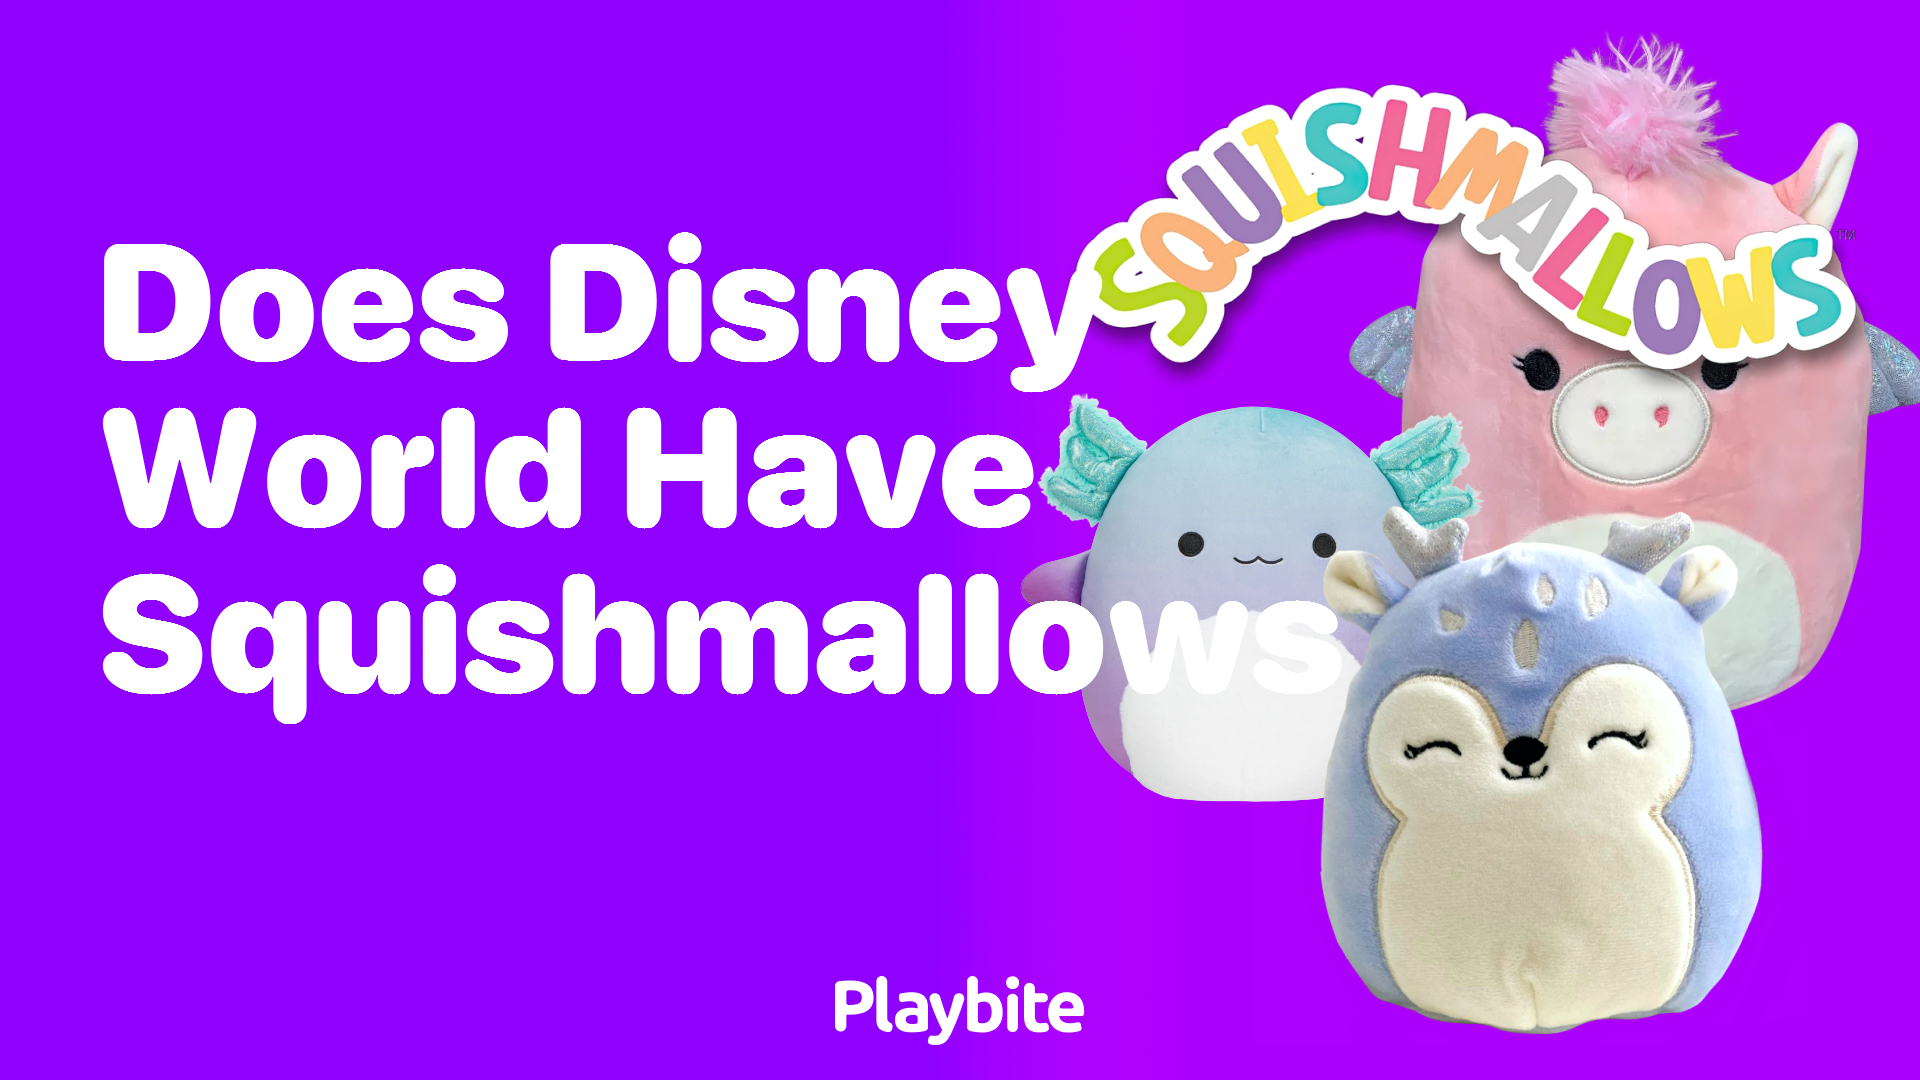 Does Disney World have Squishmallows?